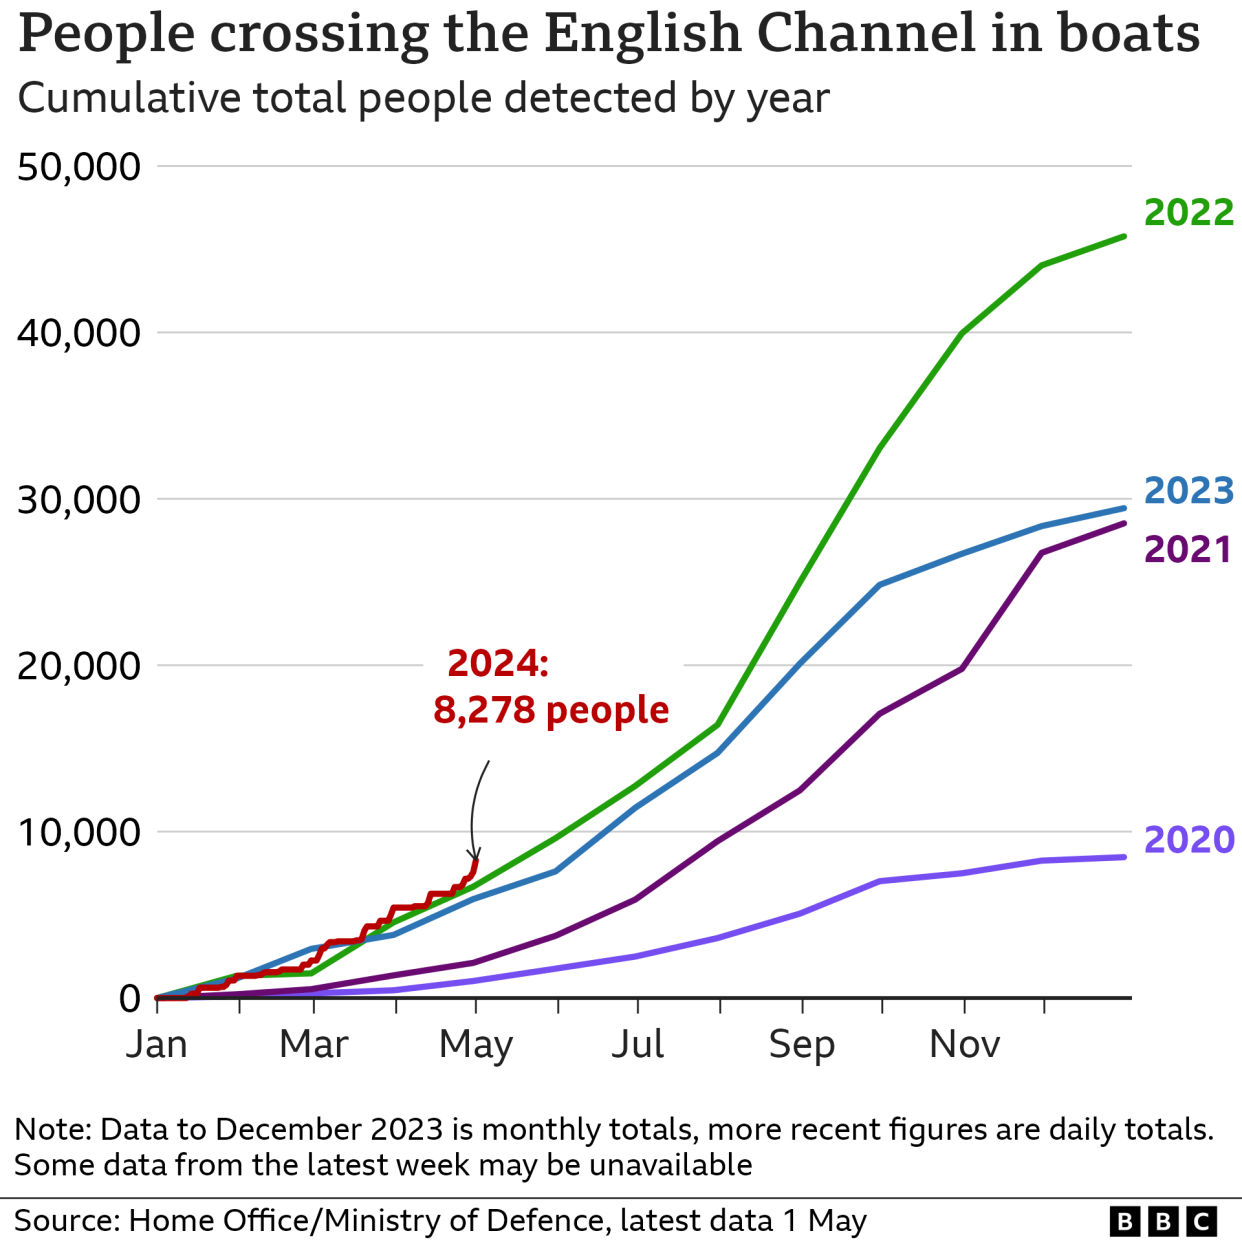 Chart displaying the number of people crossing the English Channel in boats